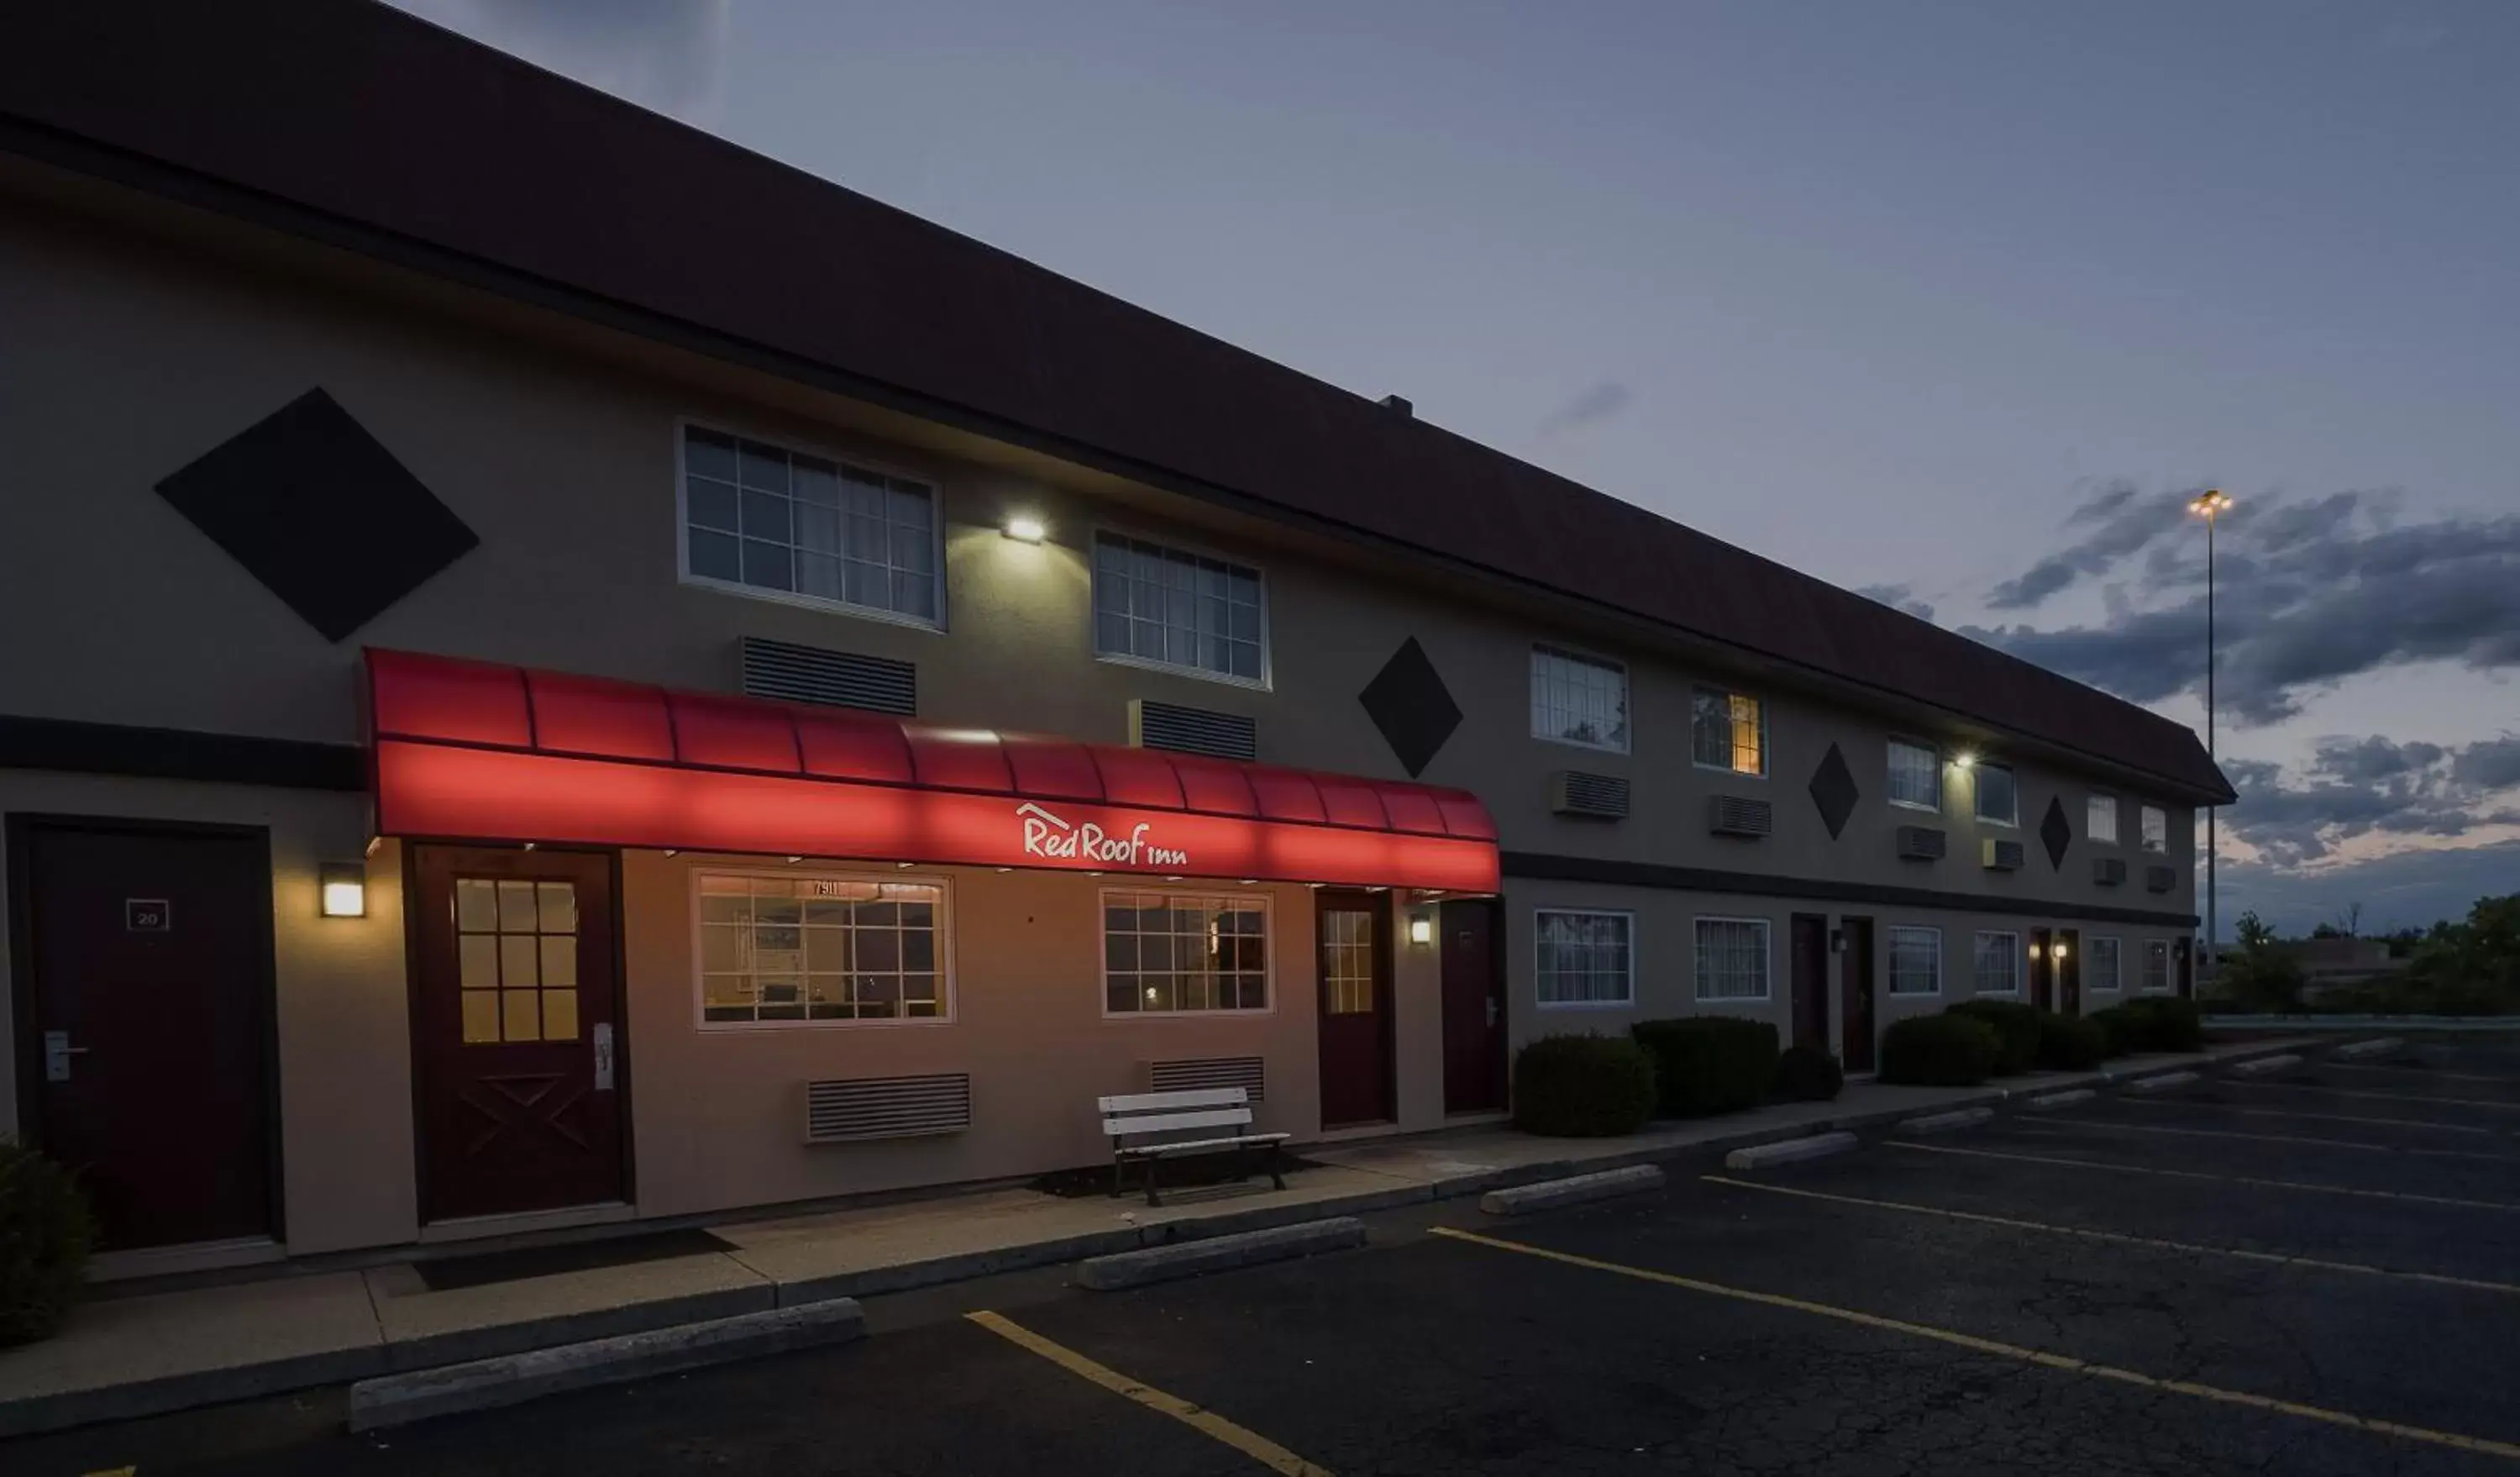 Property Building in Red Roof Inn Dayton Huber Heights